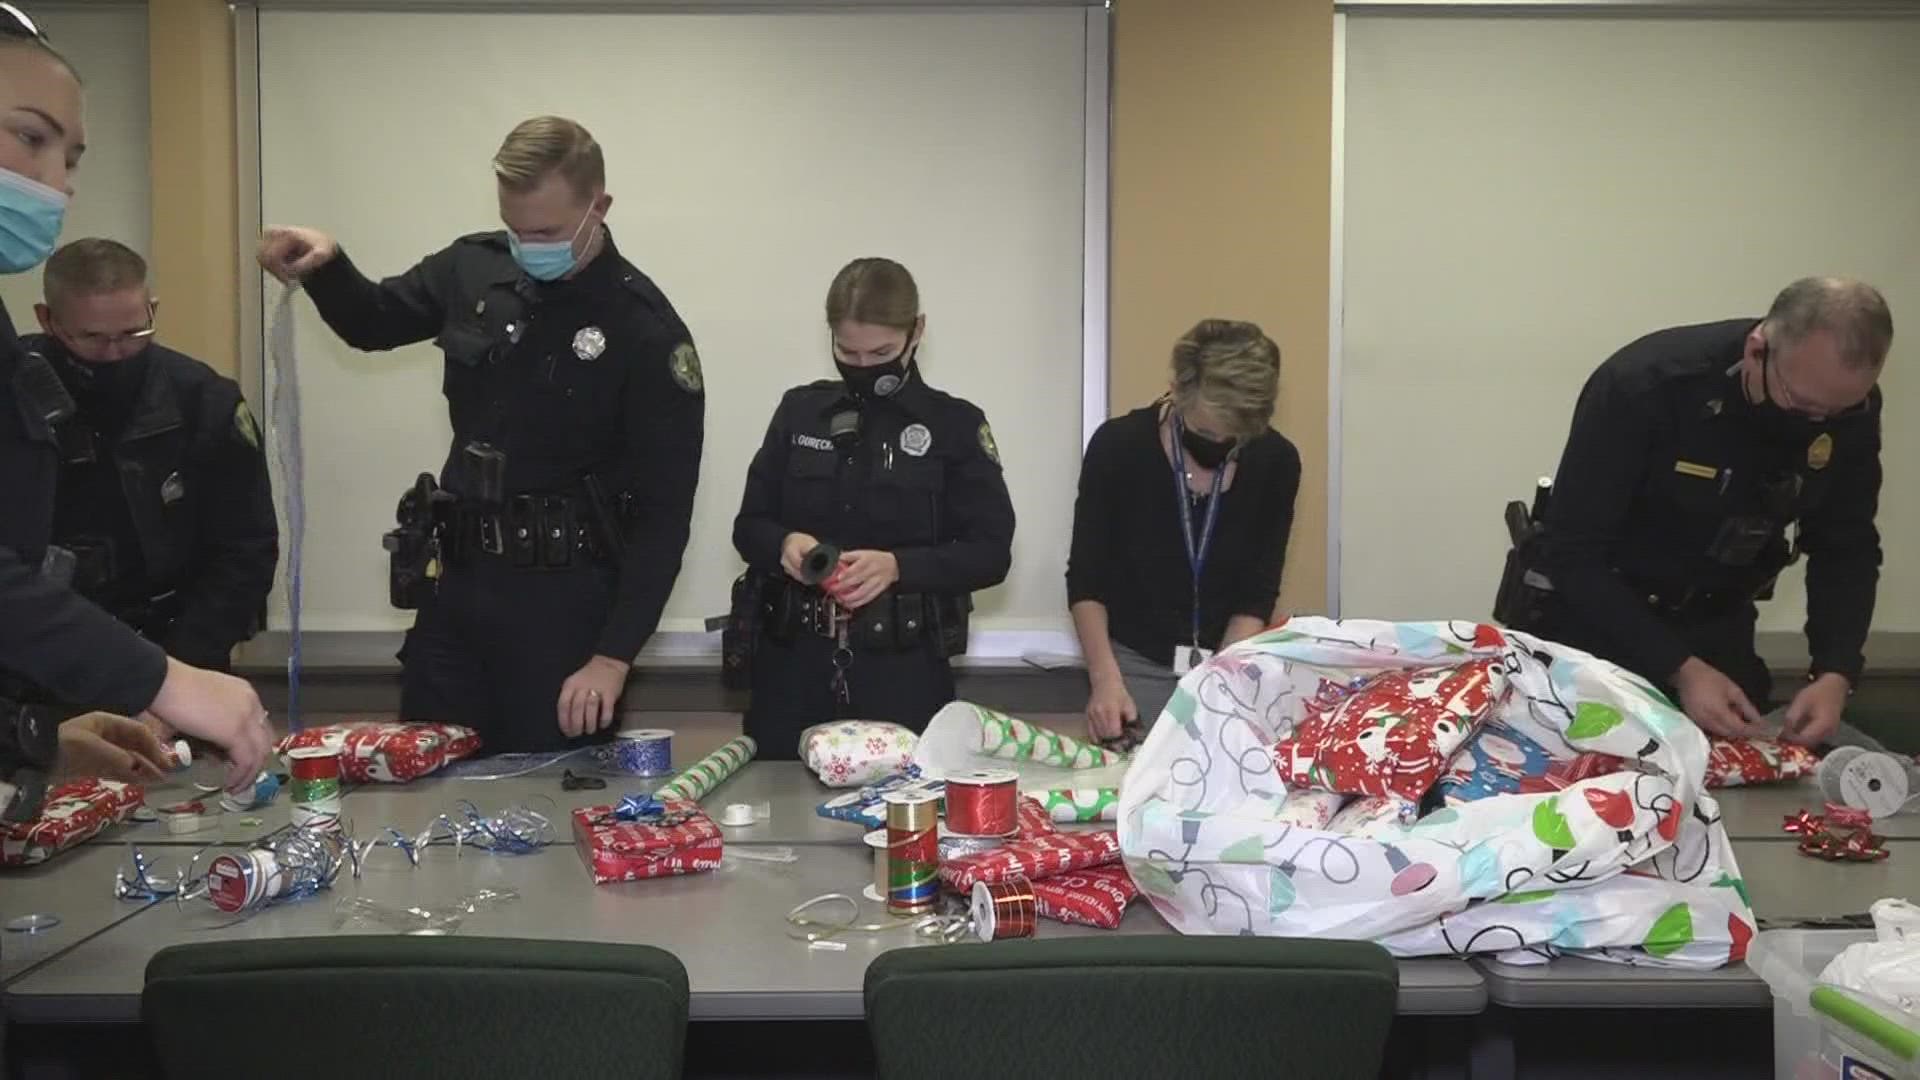 After shopping with the kids, Bangor police officers wrapped all the gifts and will be bringing them back to the lucky families on Thursday.